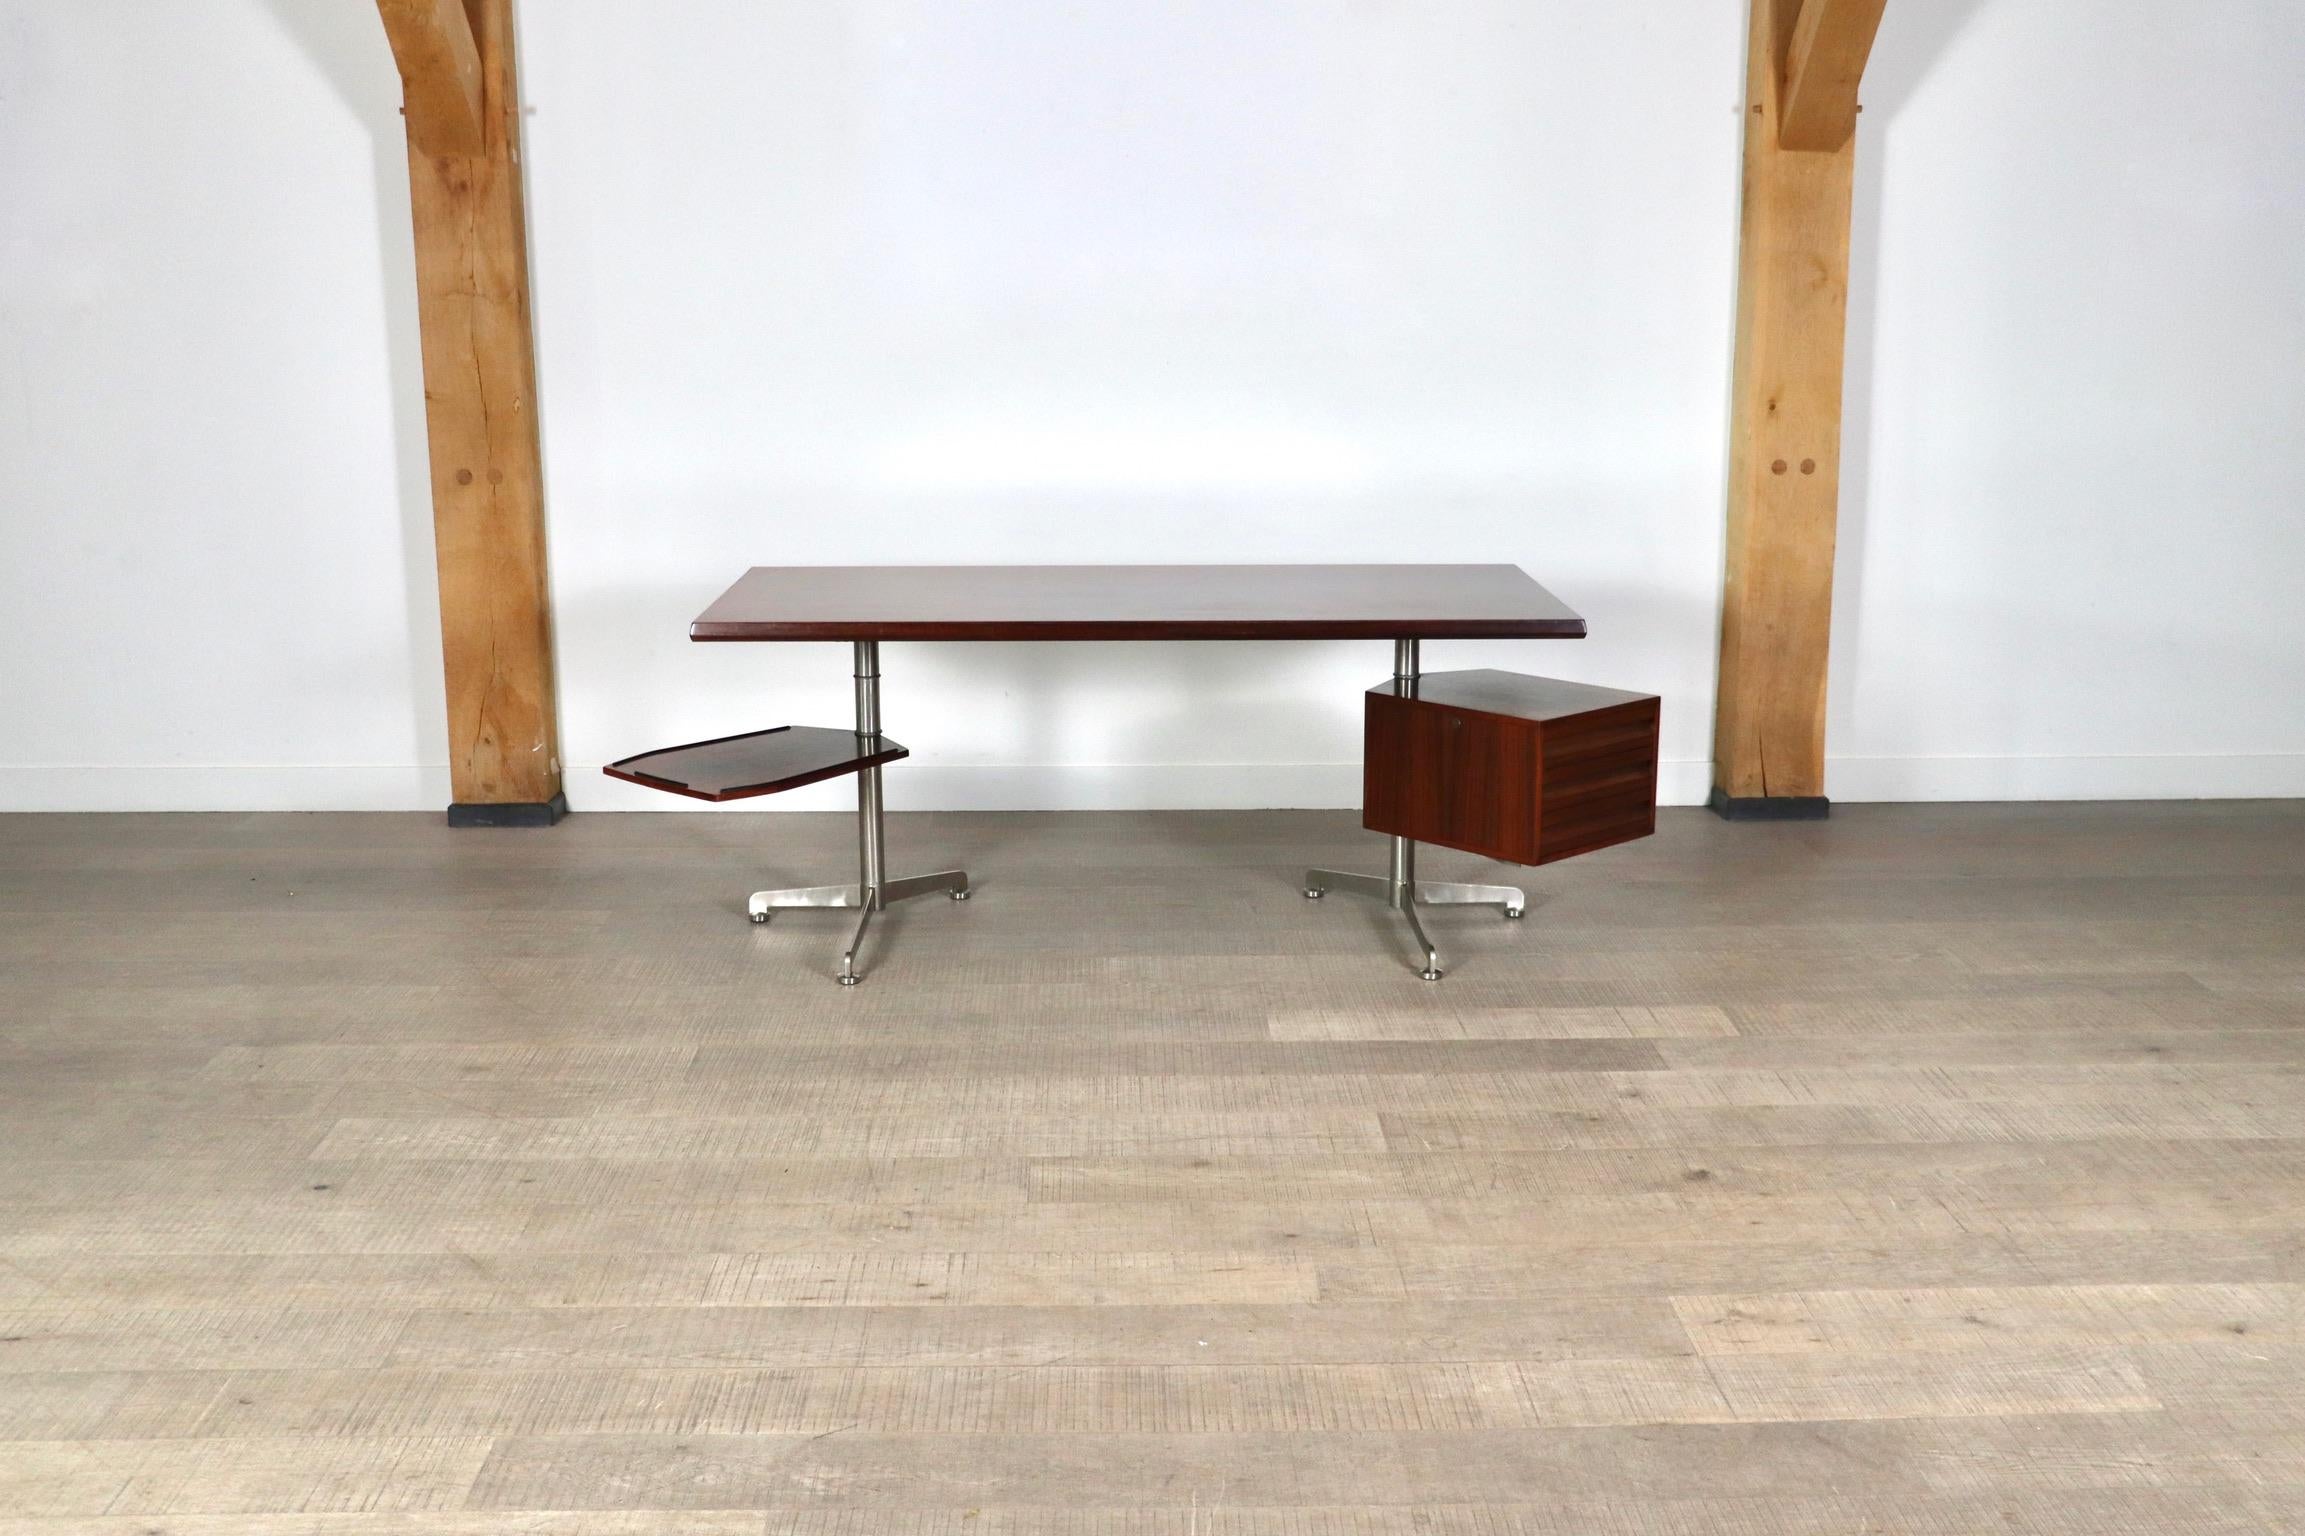 Fantastic office desk model T95 designed by Osvaldo Borsani and manufactured by Tecno, Italy 1960s. The desk has metal legs and rosewood veneer top and compartments. This nice sized desk has a cabinet and an extendable shelve which can turn around